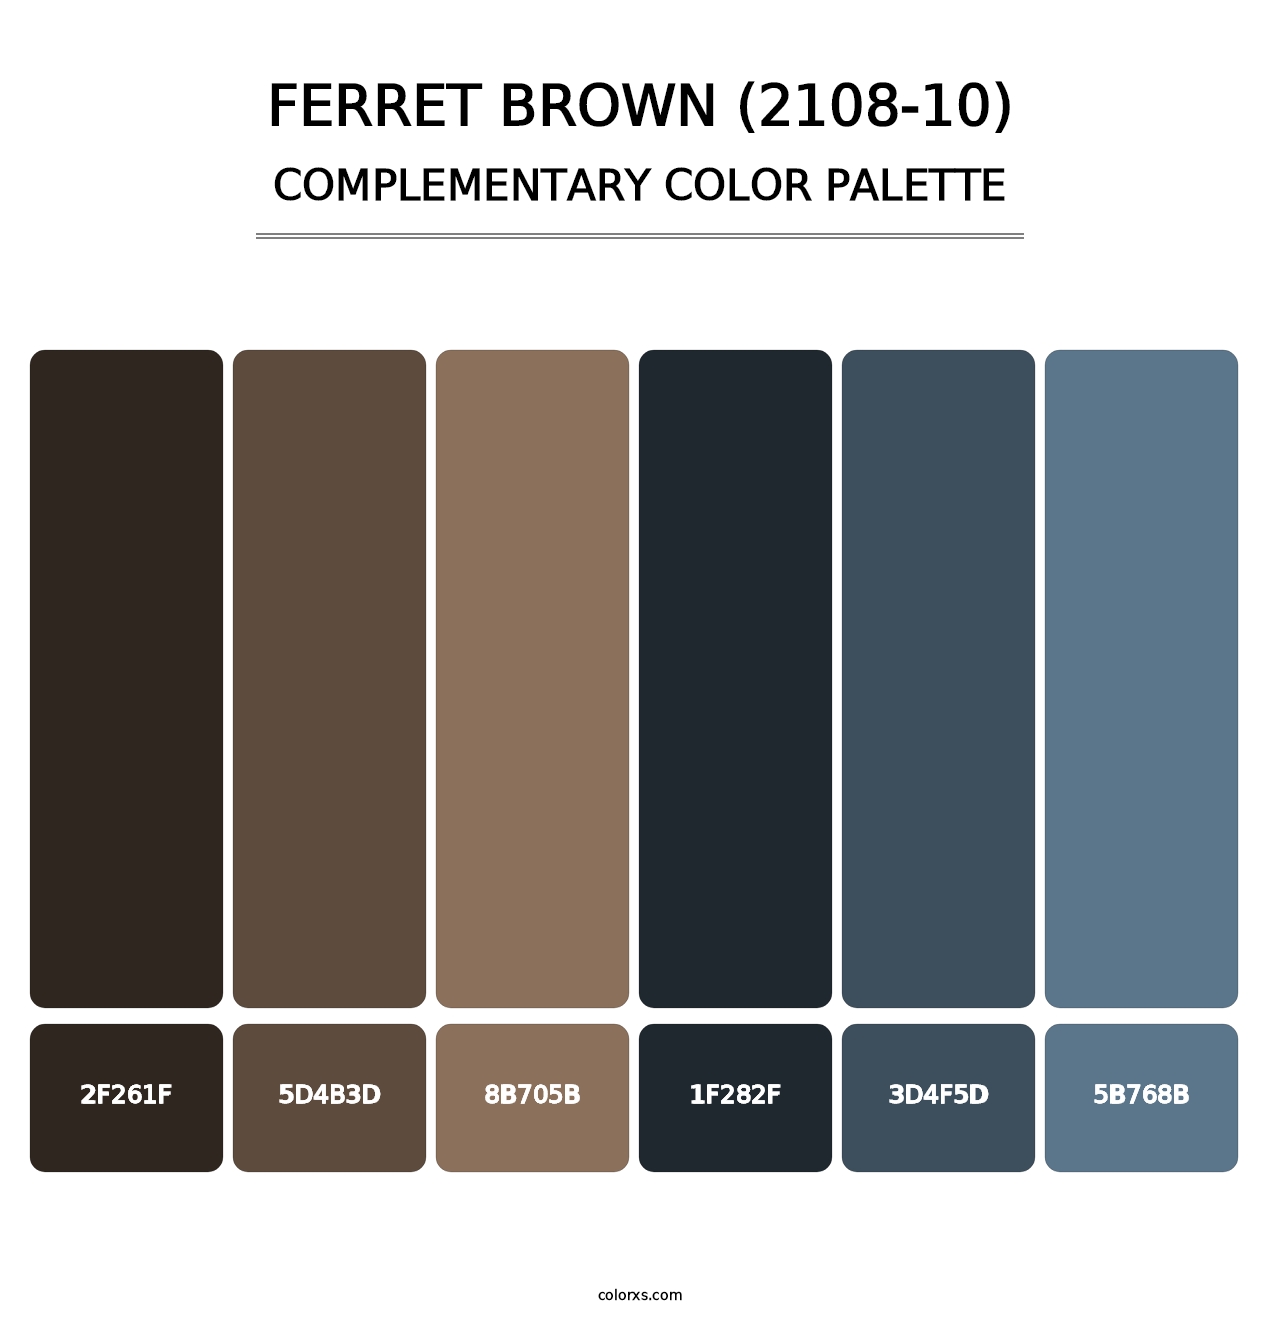 Ferret Brown (2108-10) - Complementary Color Palette